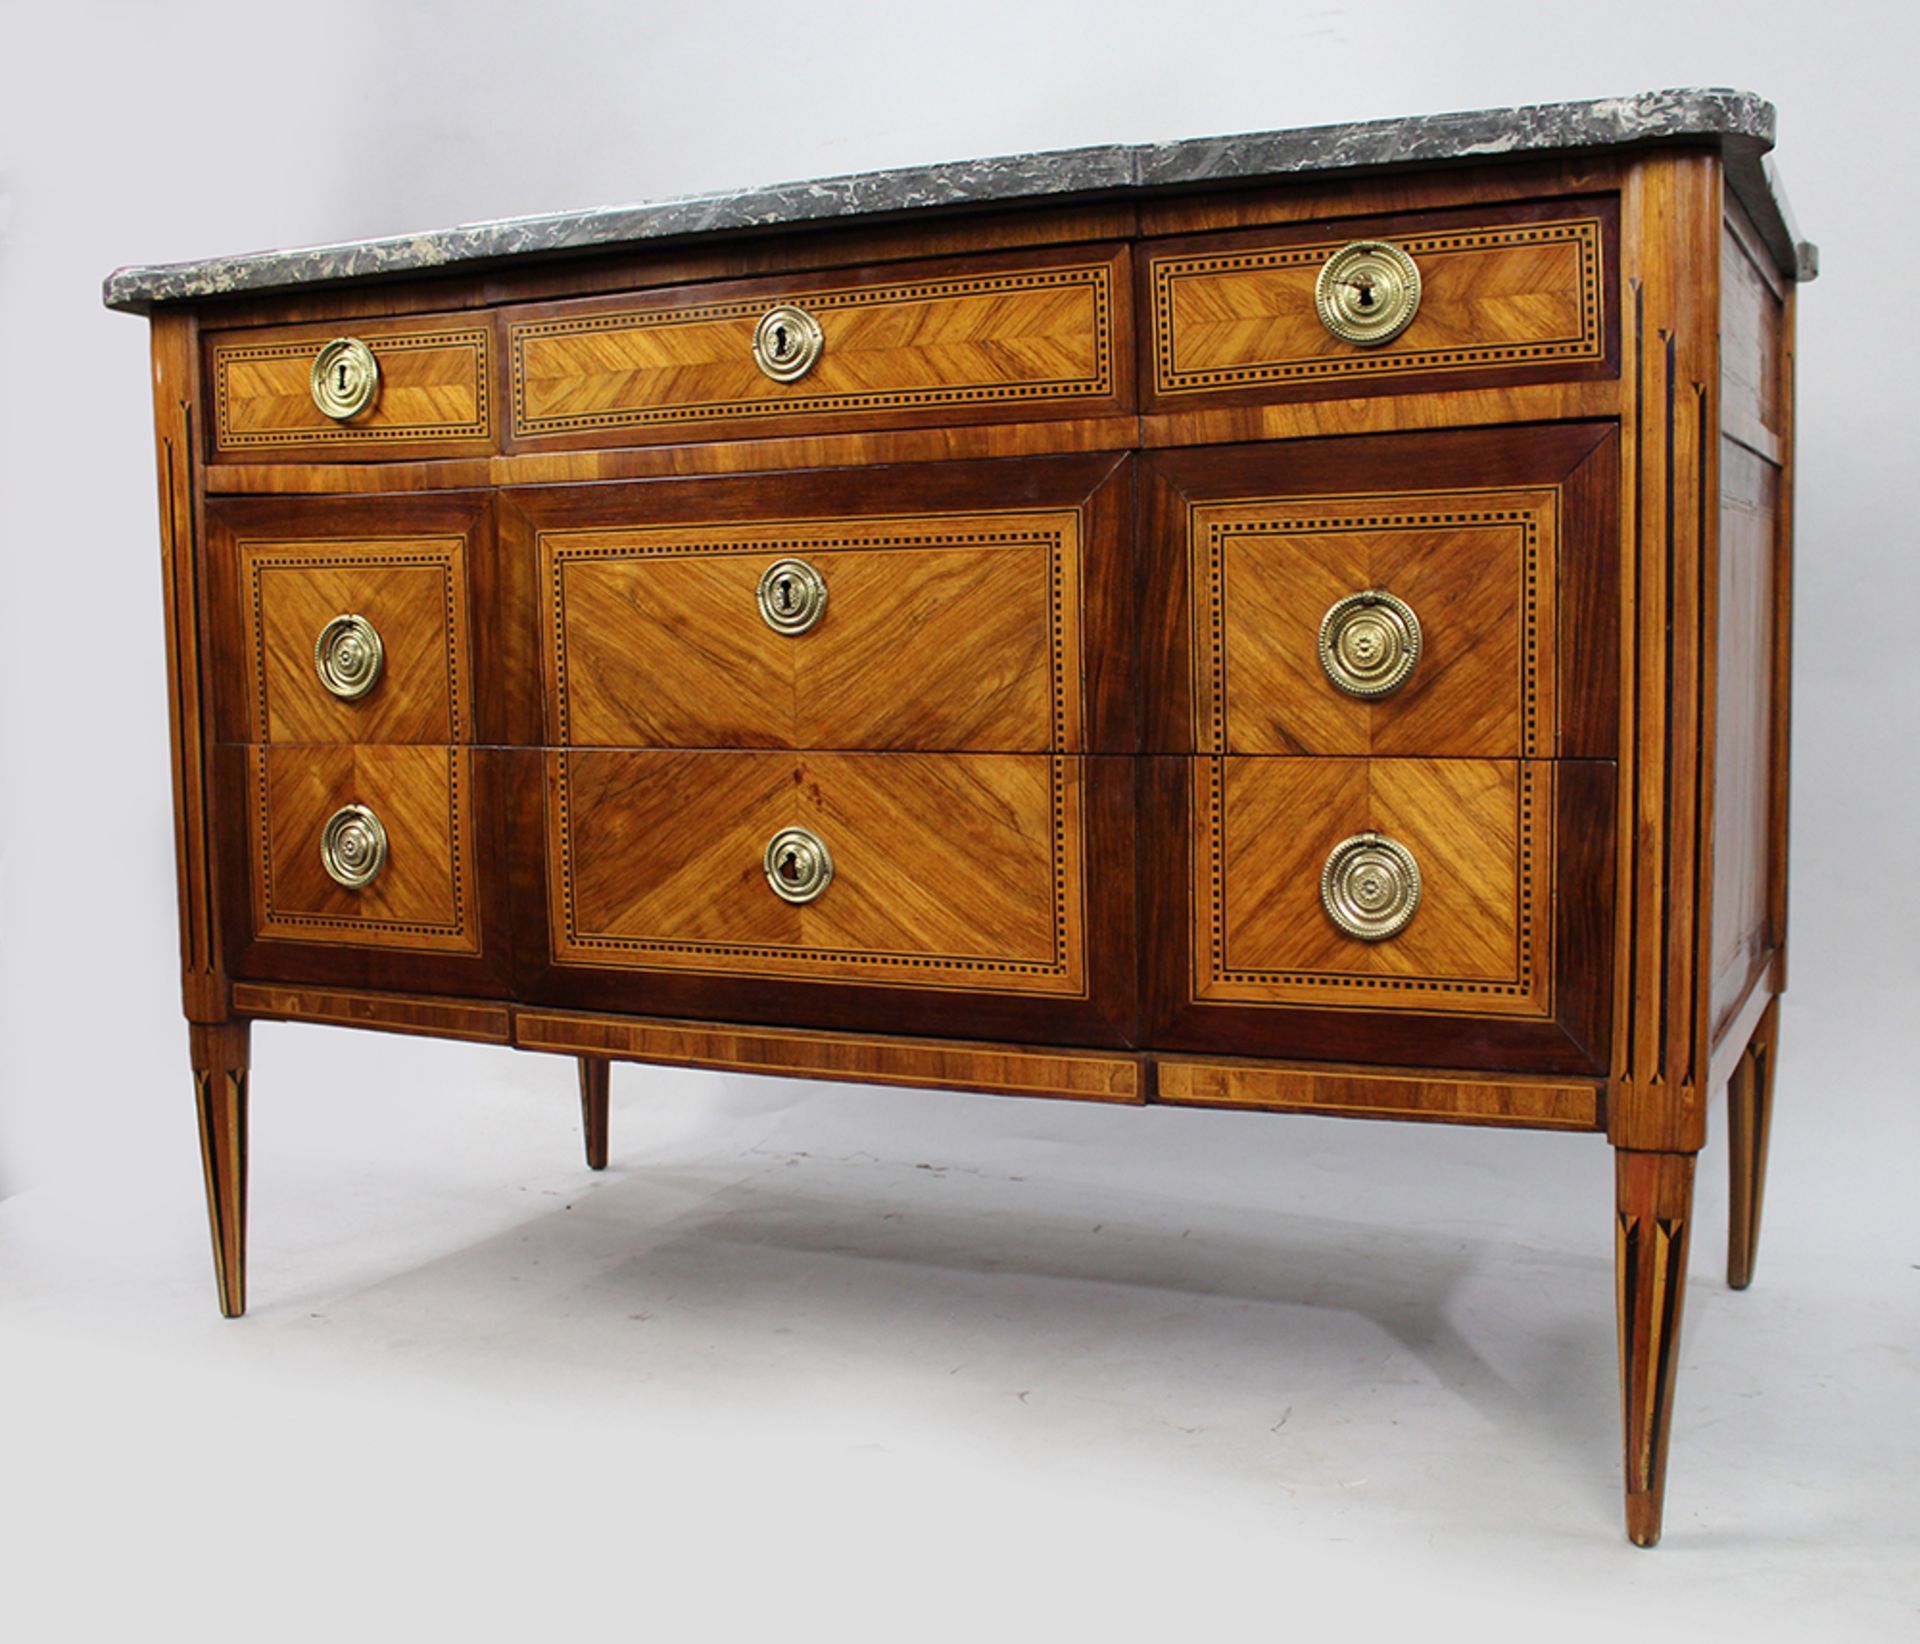 18th c. Inlaid Marble Topped Commode - Image 3 of 14